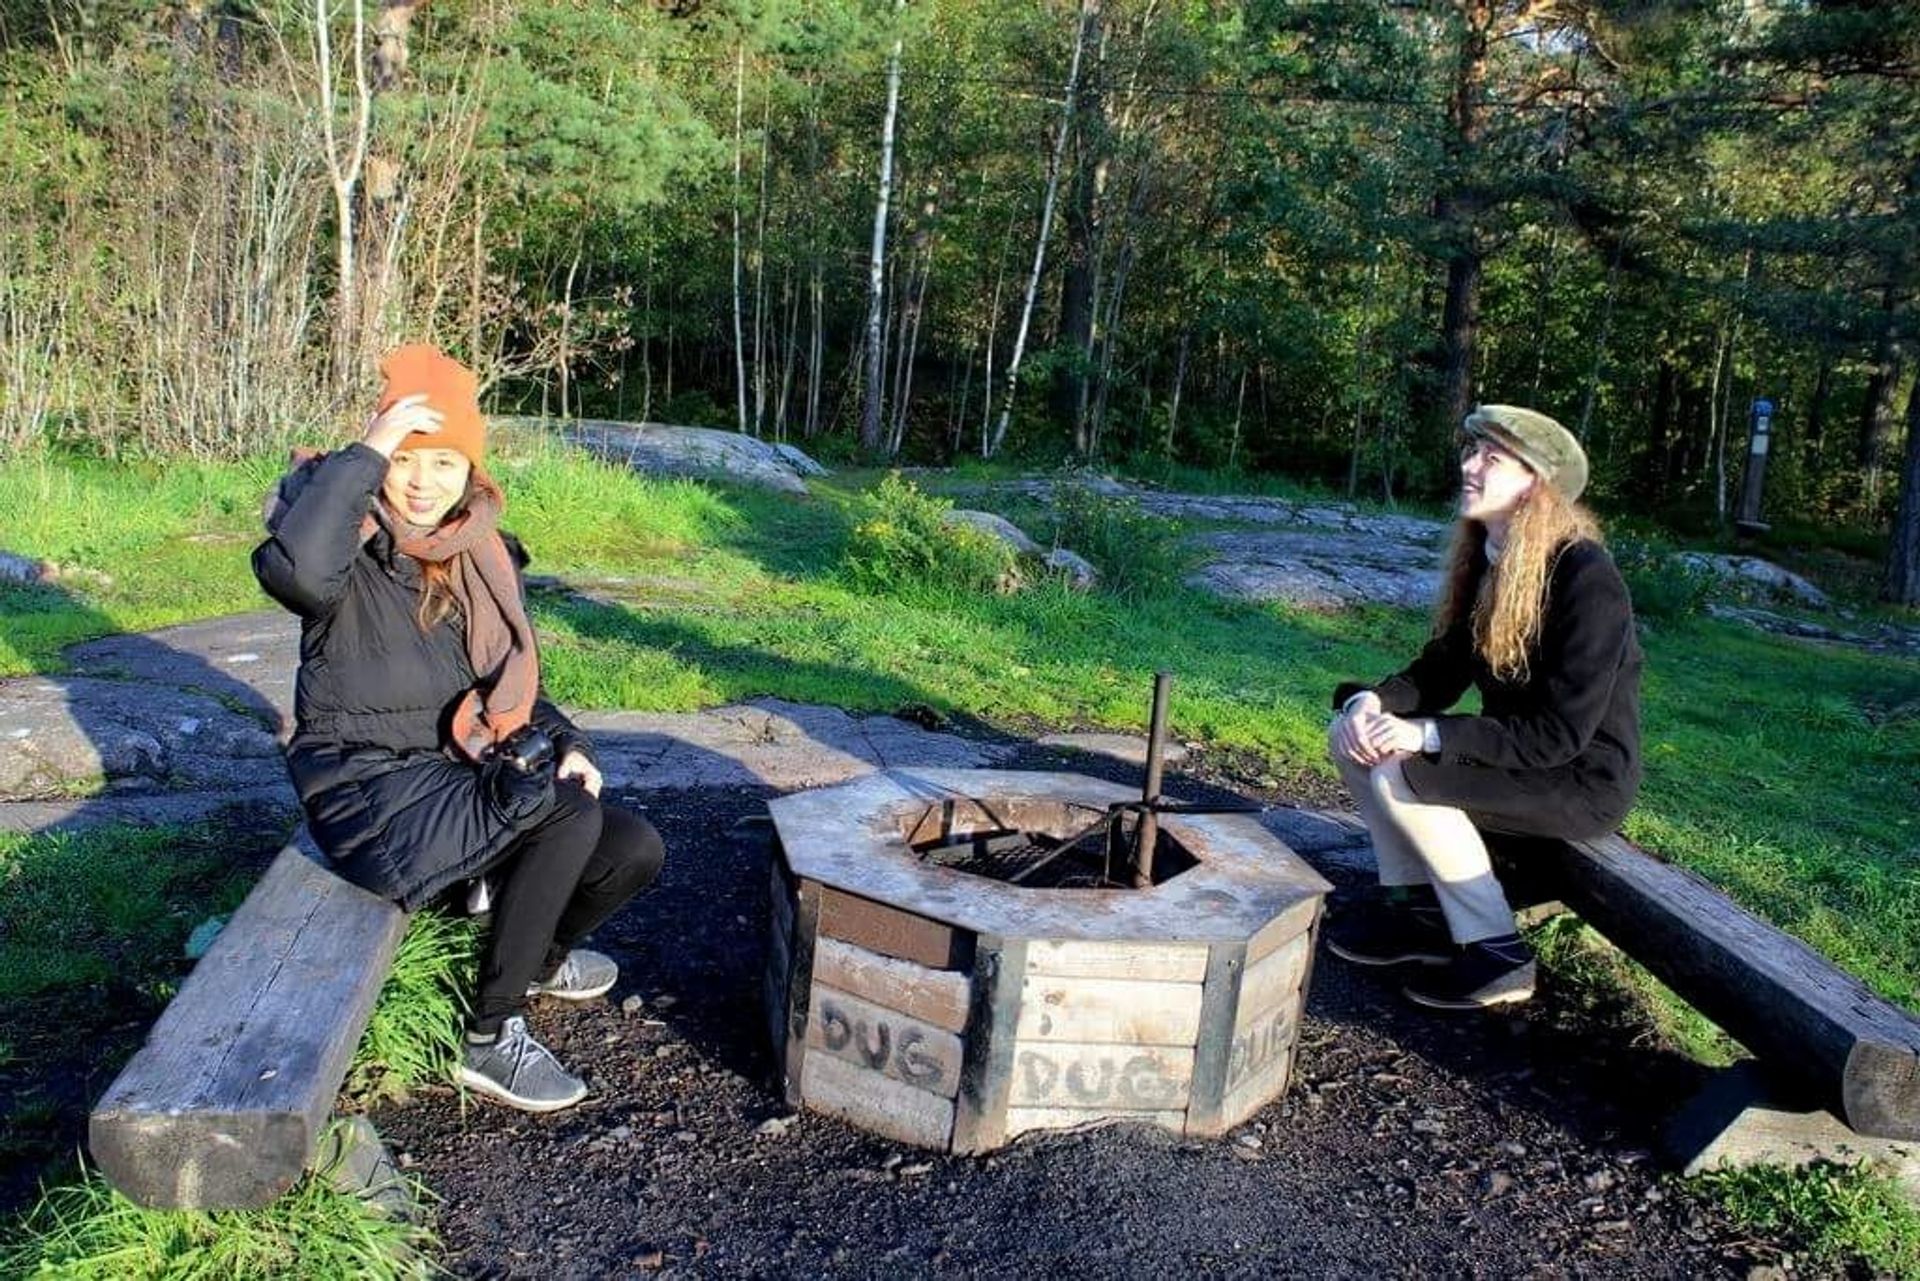 Two women by a fireplace in the forest. It is chilly as both are wearing winter jackets.